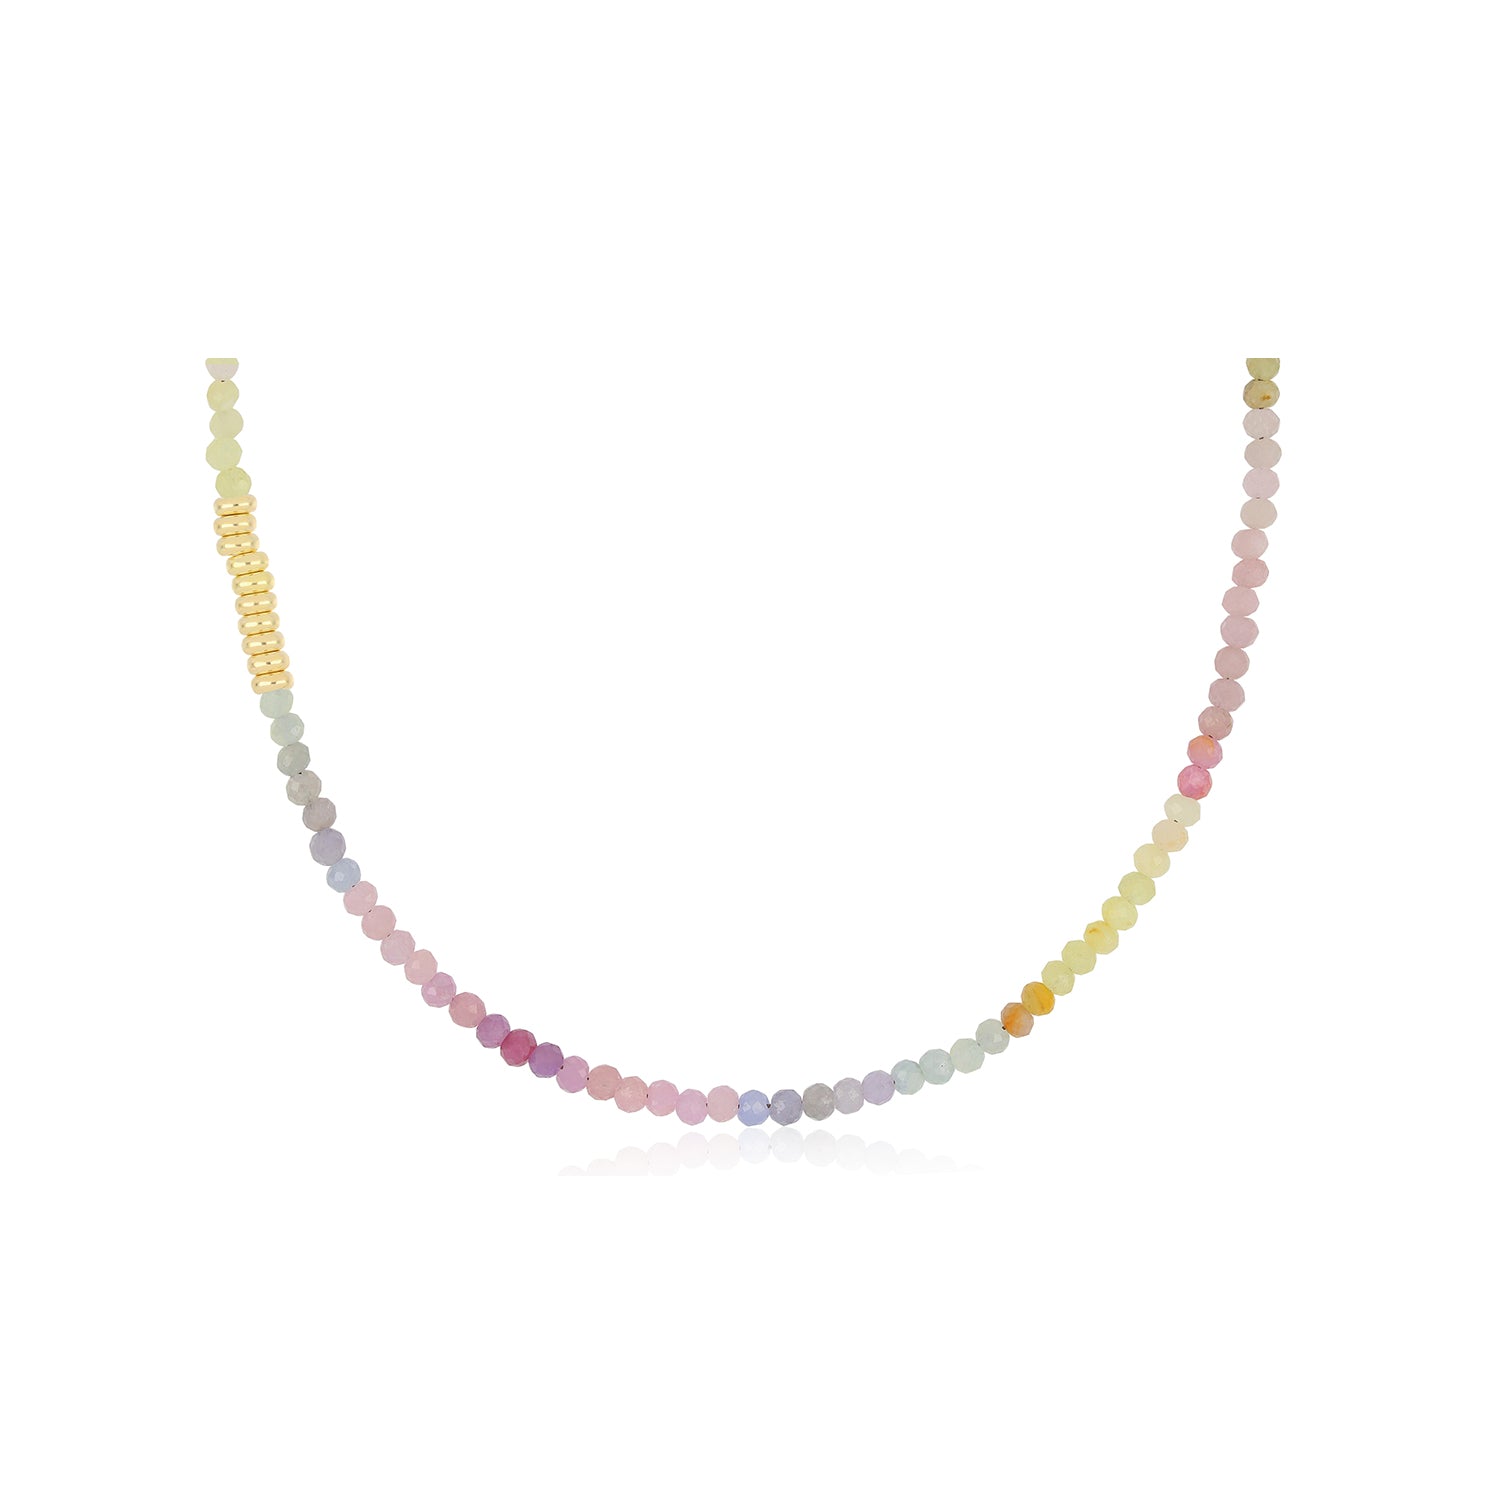 Ombré Sapphire Birthstone Bead Necklace in 14k yellow gold